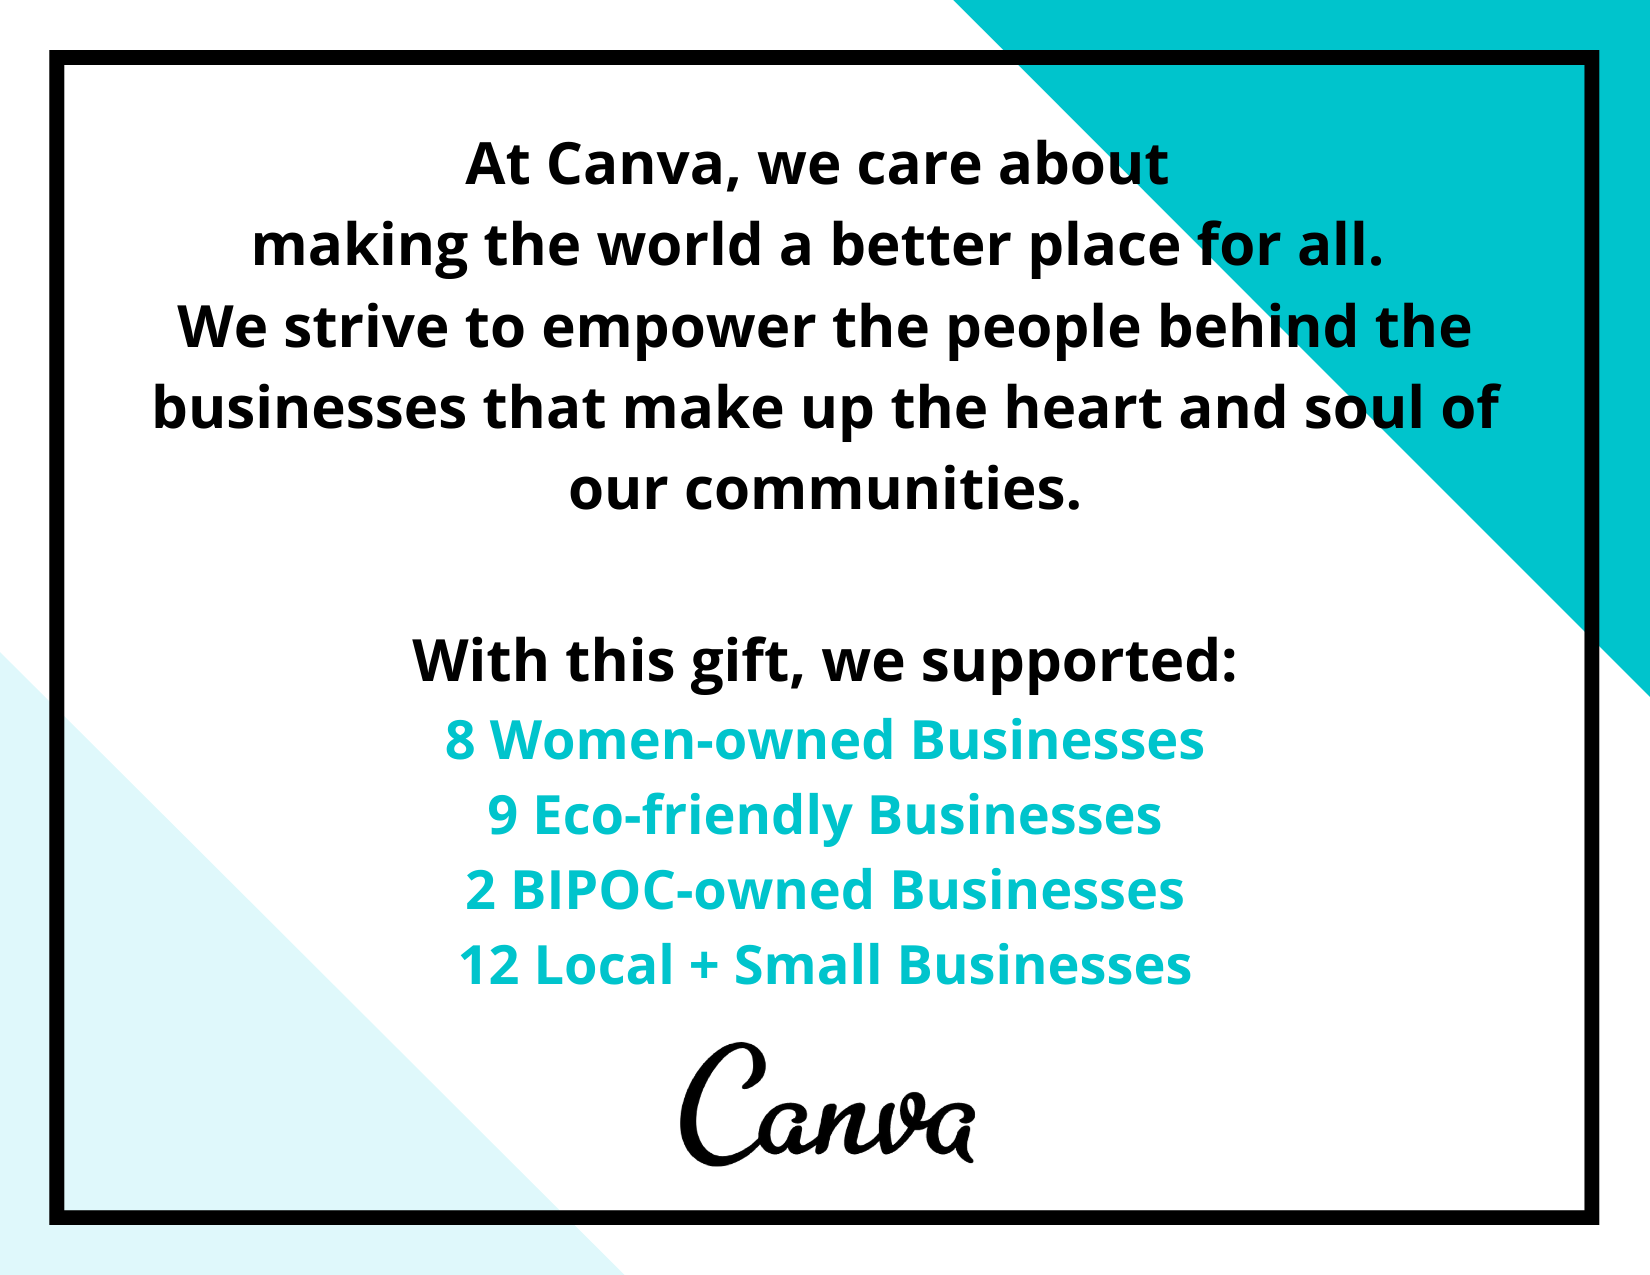 Canva cares about empowering small businesses